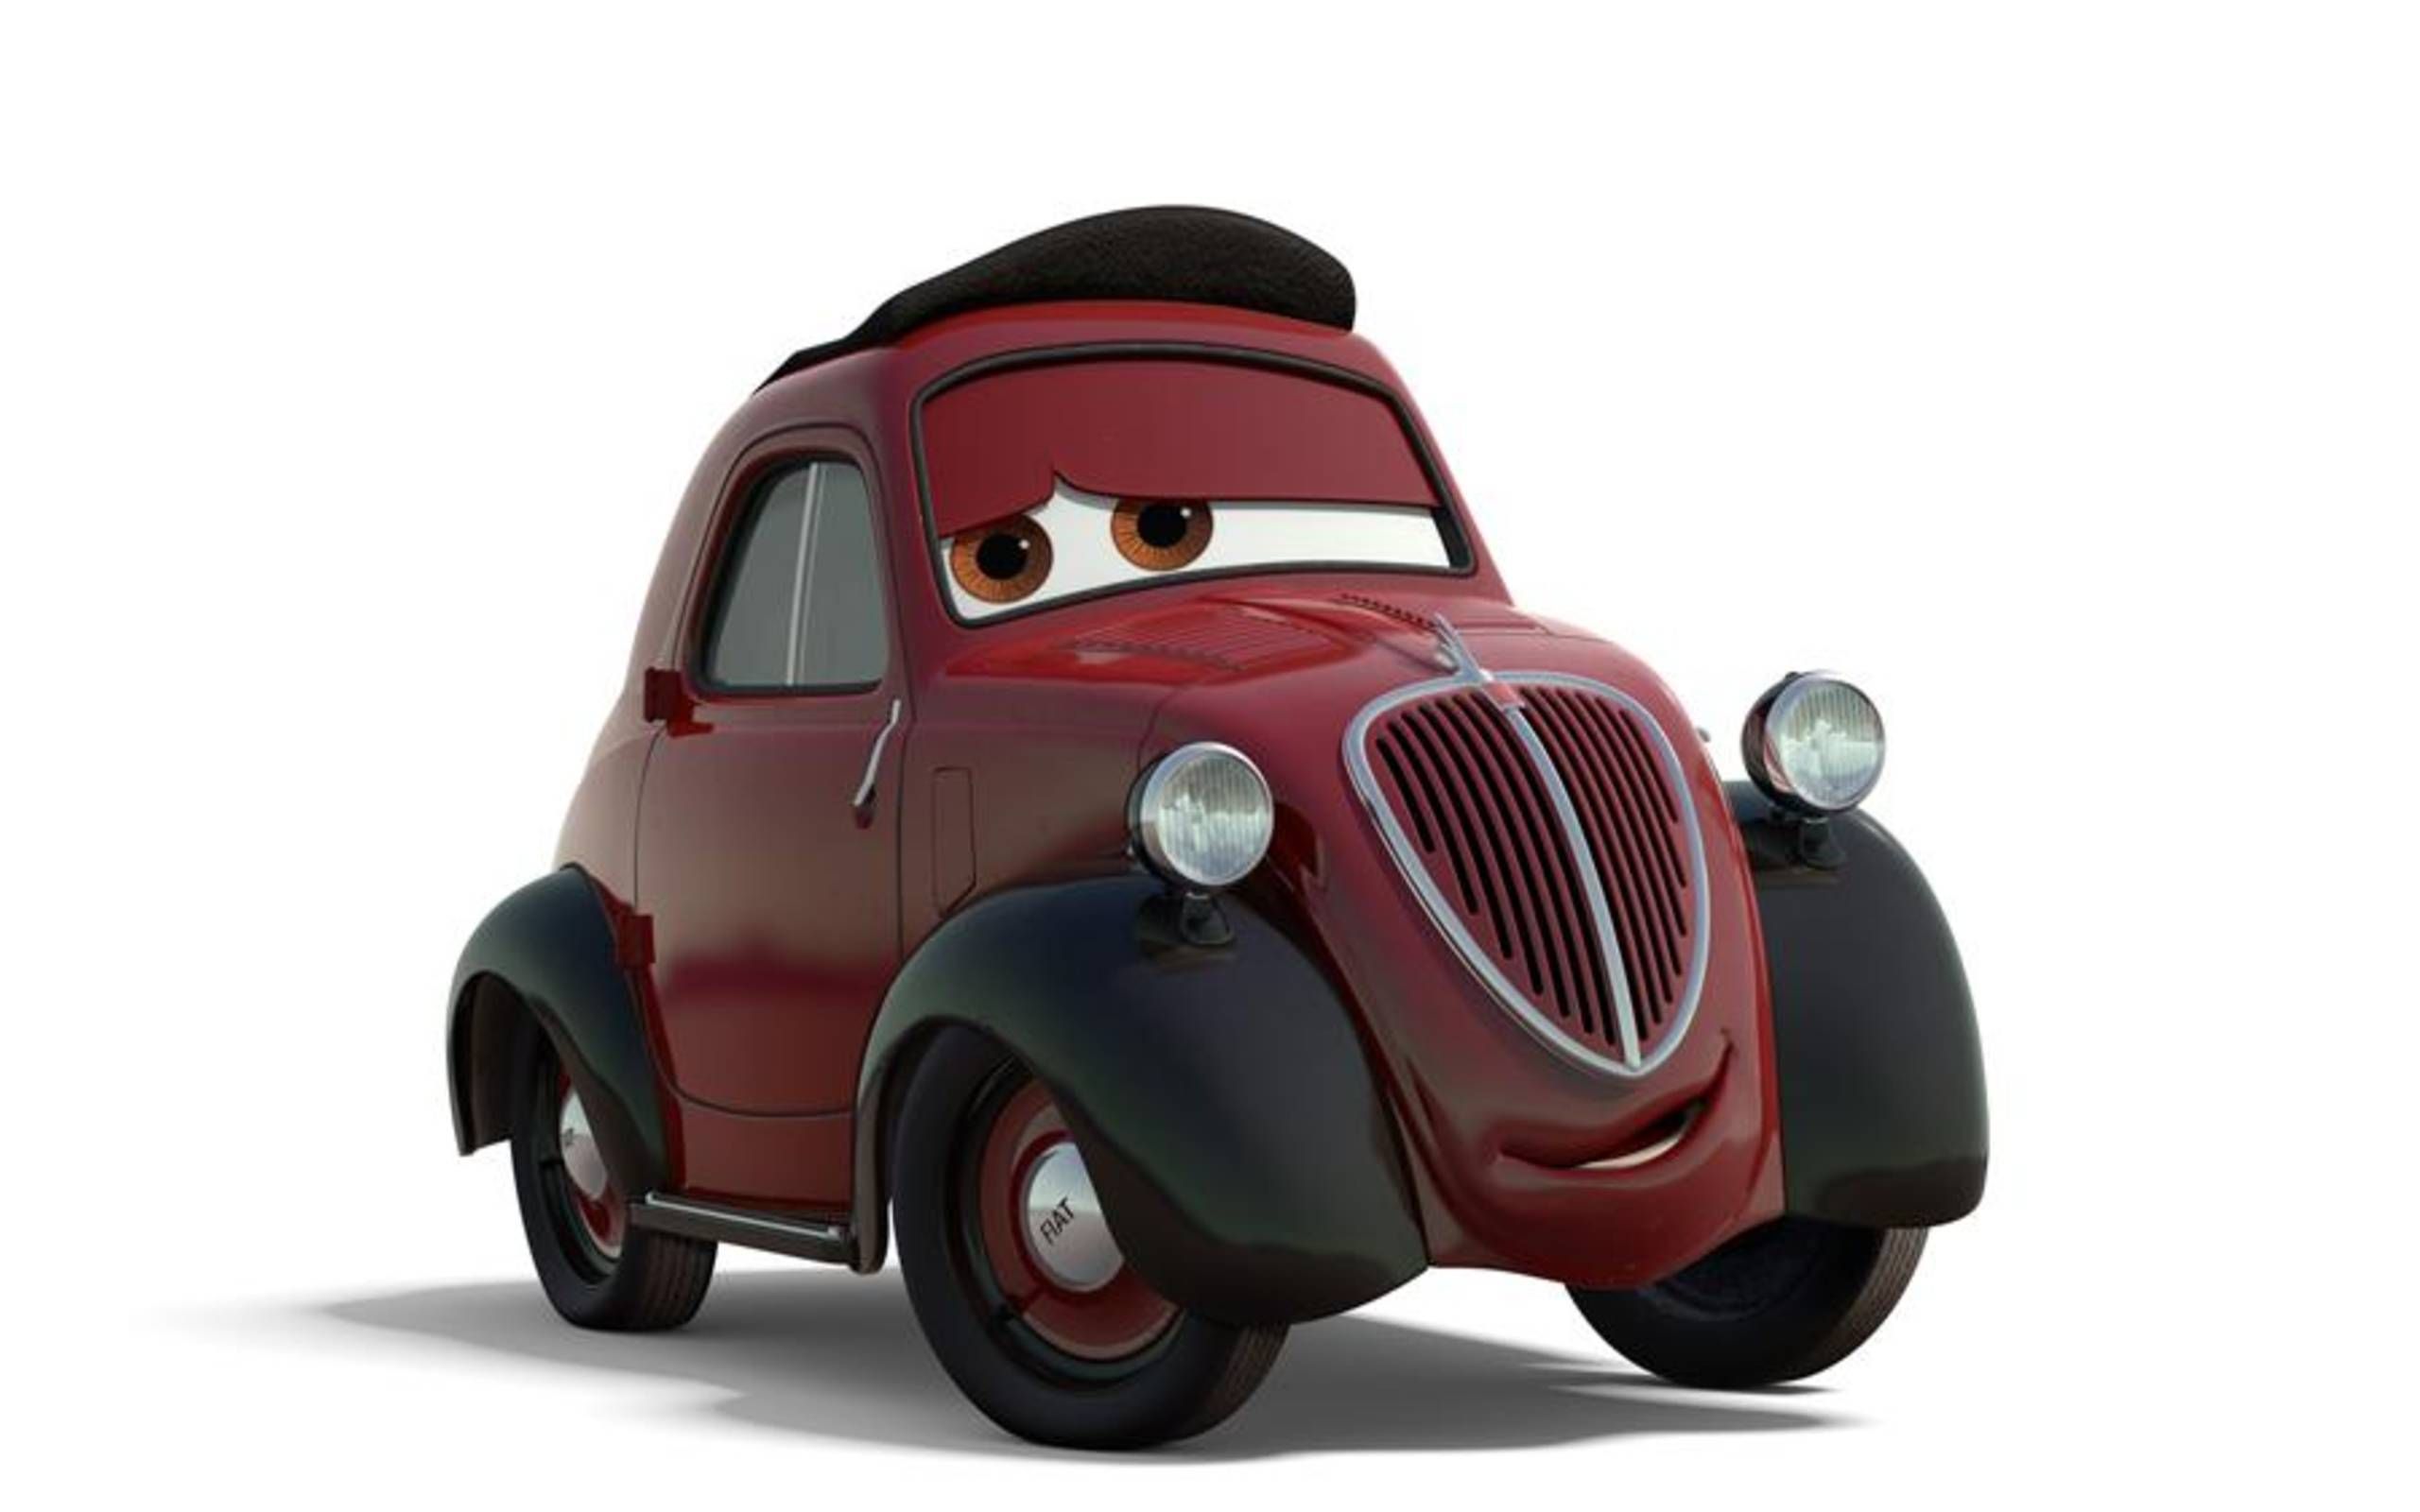 cars 2 characters